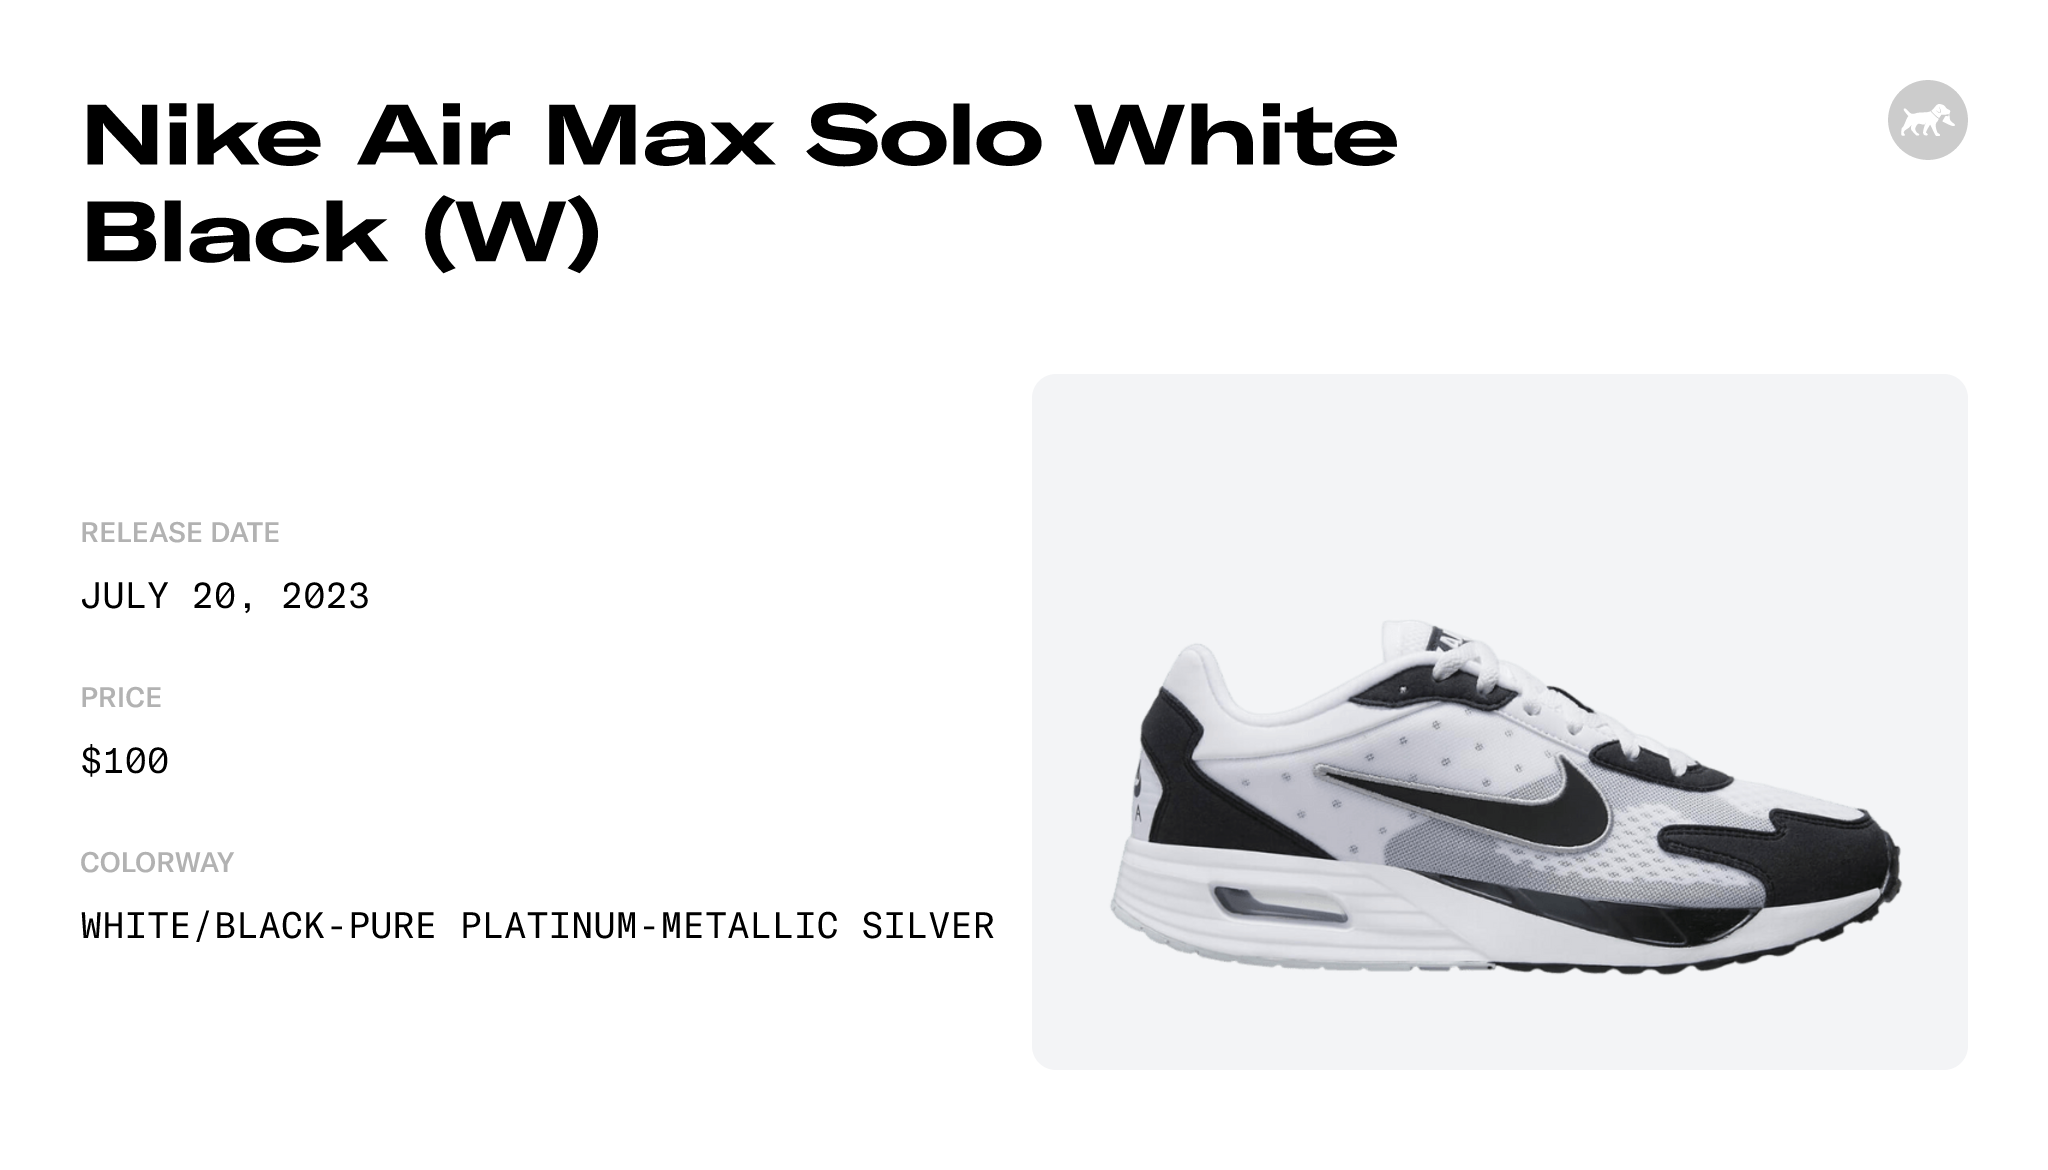 Nike Air Max Solo White Black (W) - FN0784-100 Raffles and Release